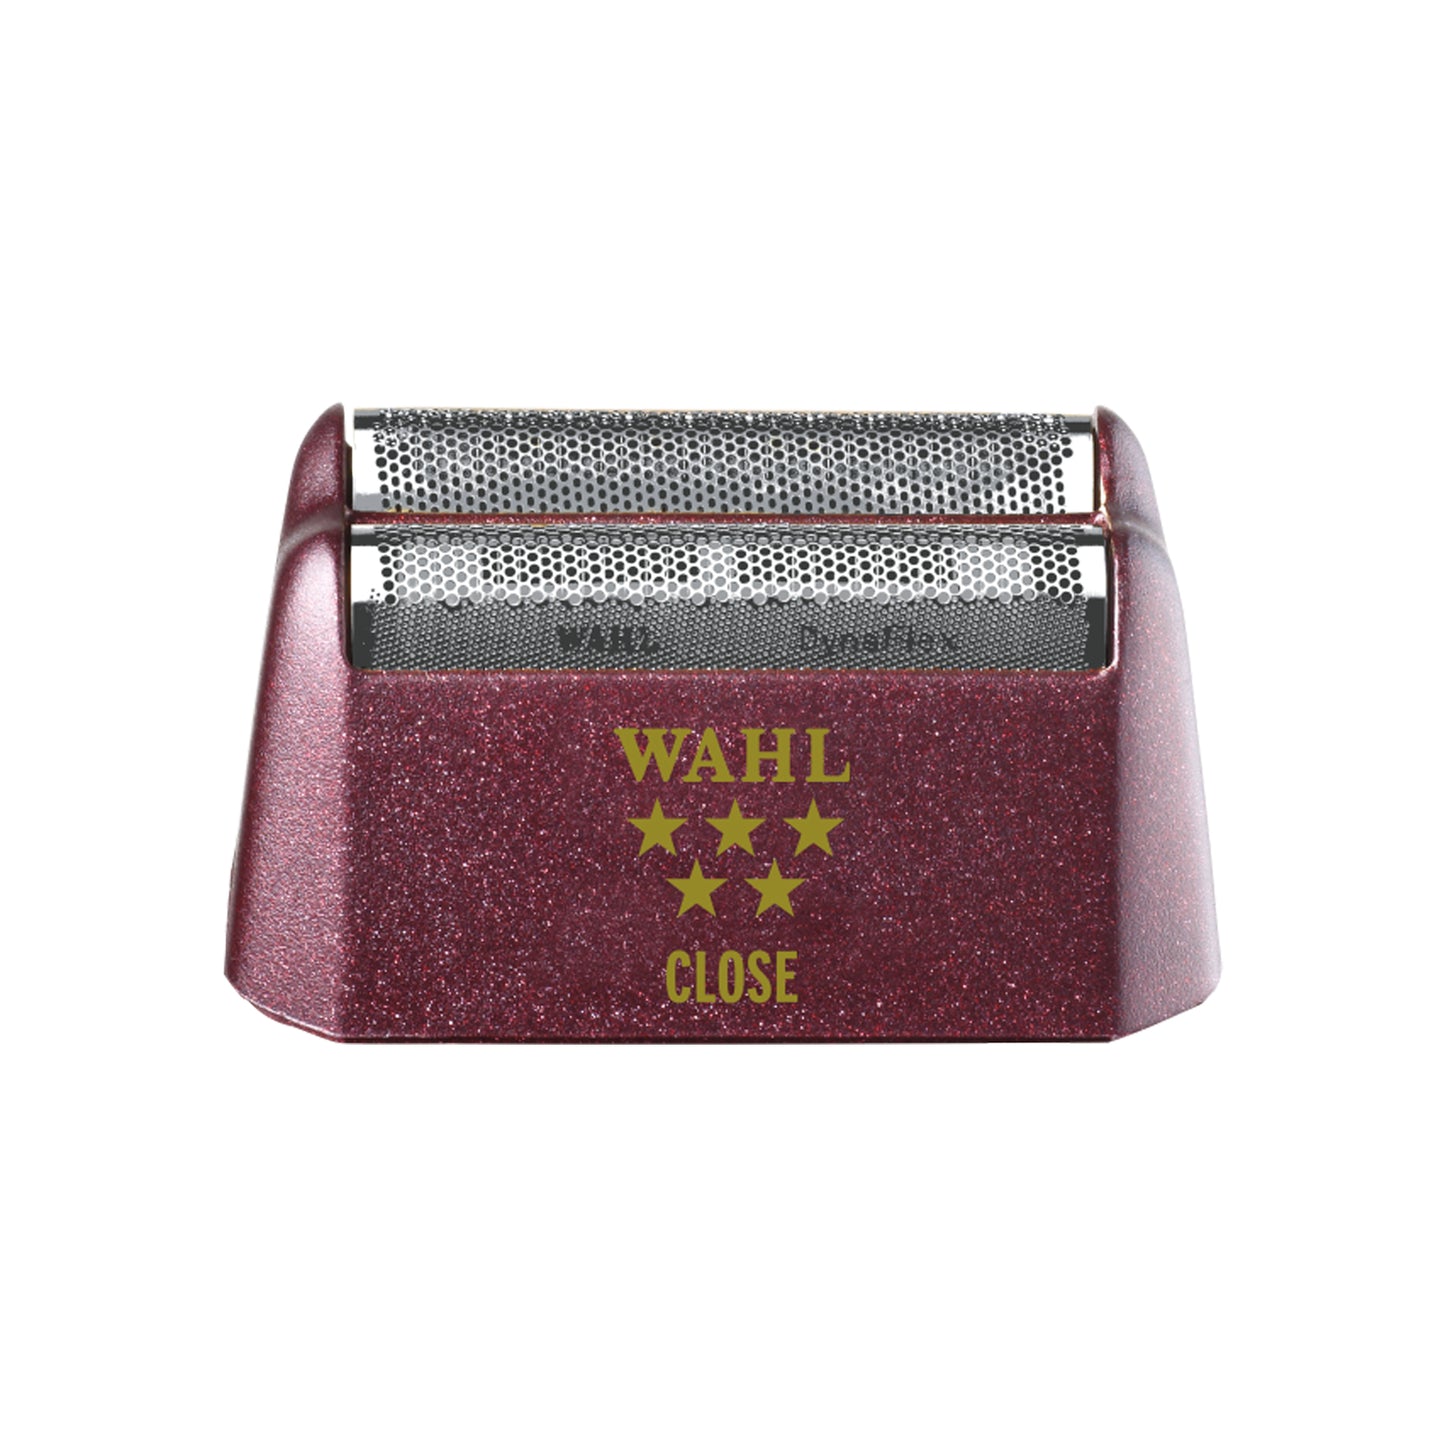 Wahl 5-Star Shaver Close Replacement Foil